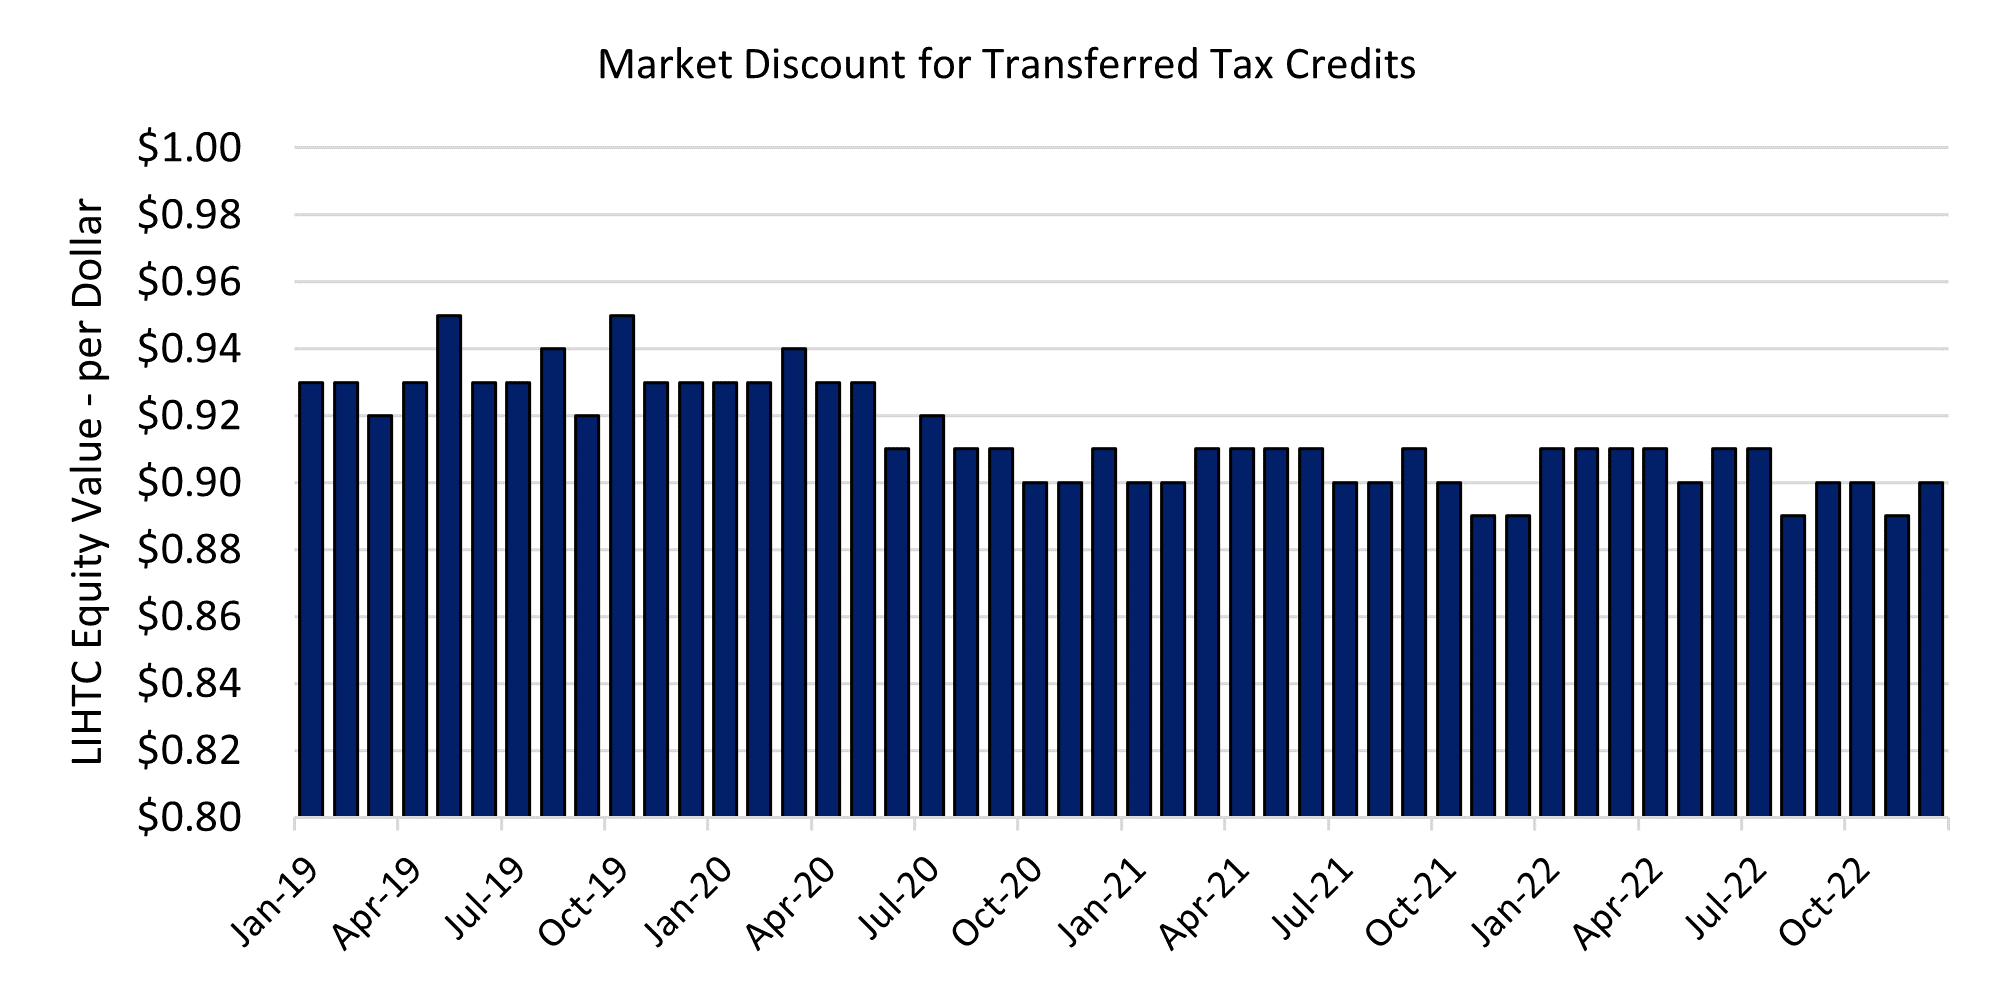 Historical pricing of LIHTC credits